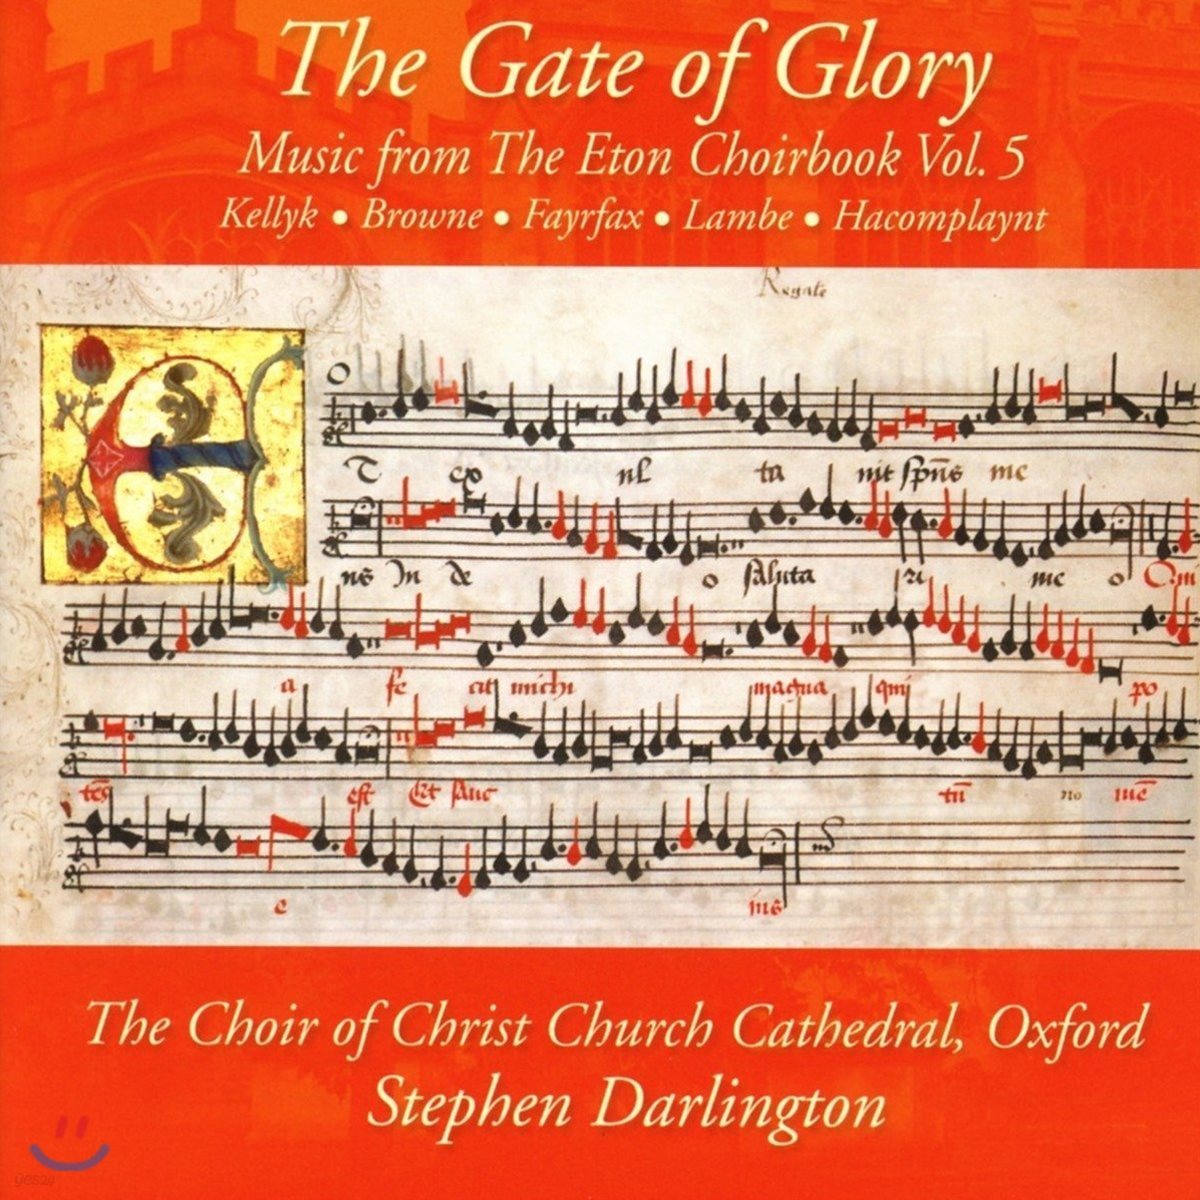 Christ Church Cathedral Choir Oxford 영광의 문 - 이튼 합창곡집 5집 (The Gate of Glory - Music from the Eton Choirbook Volume 5)